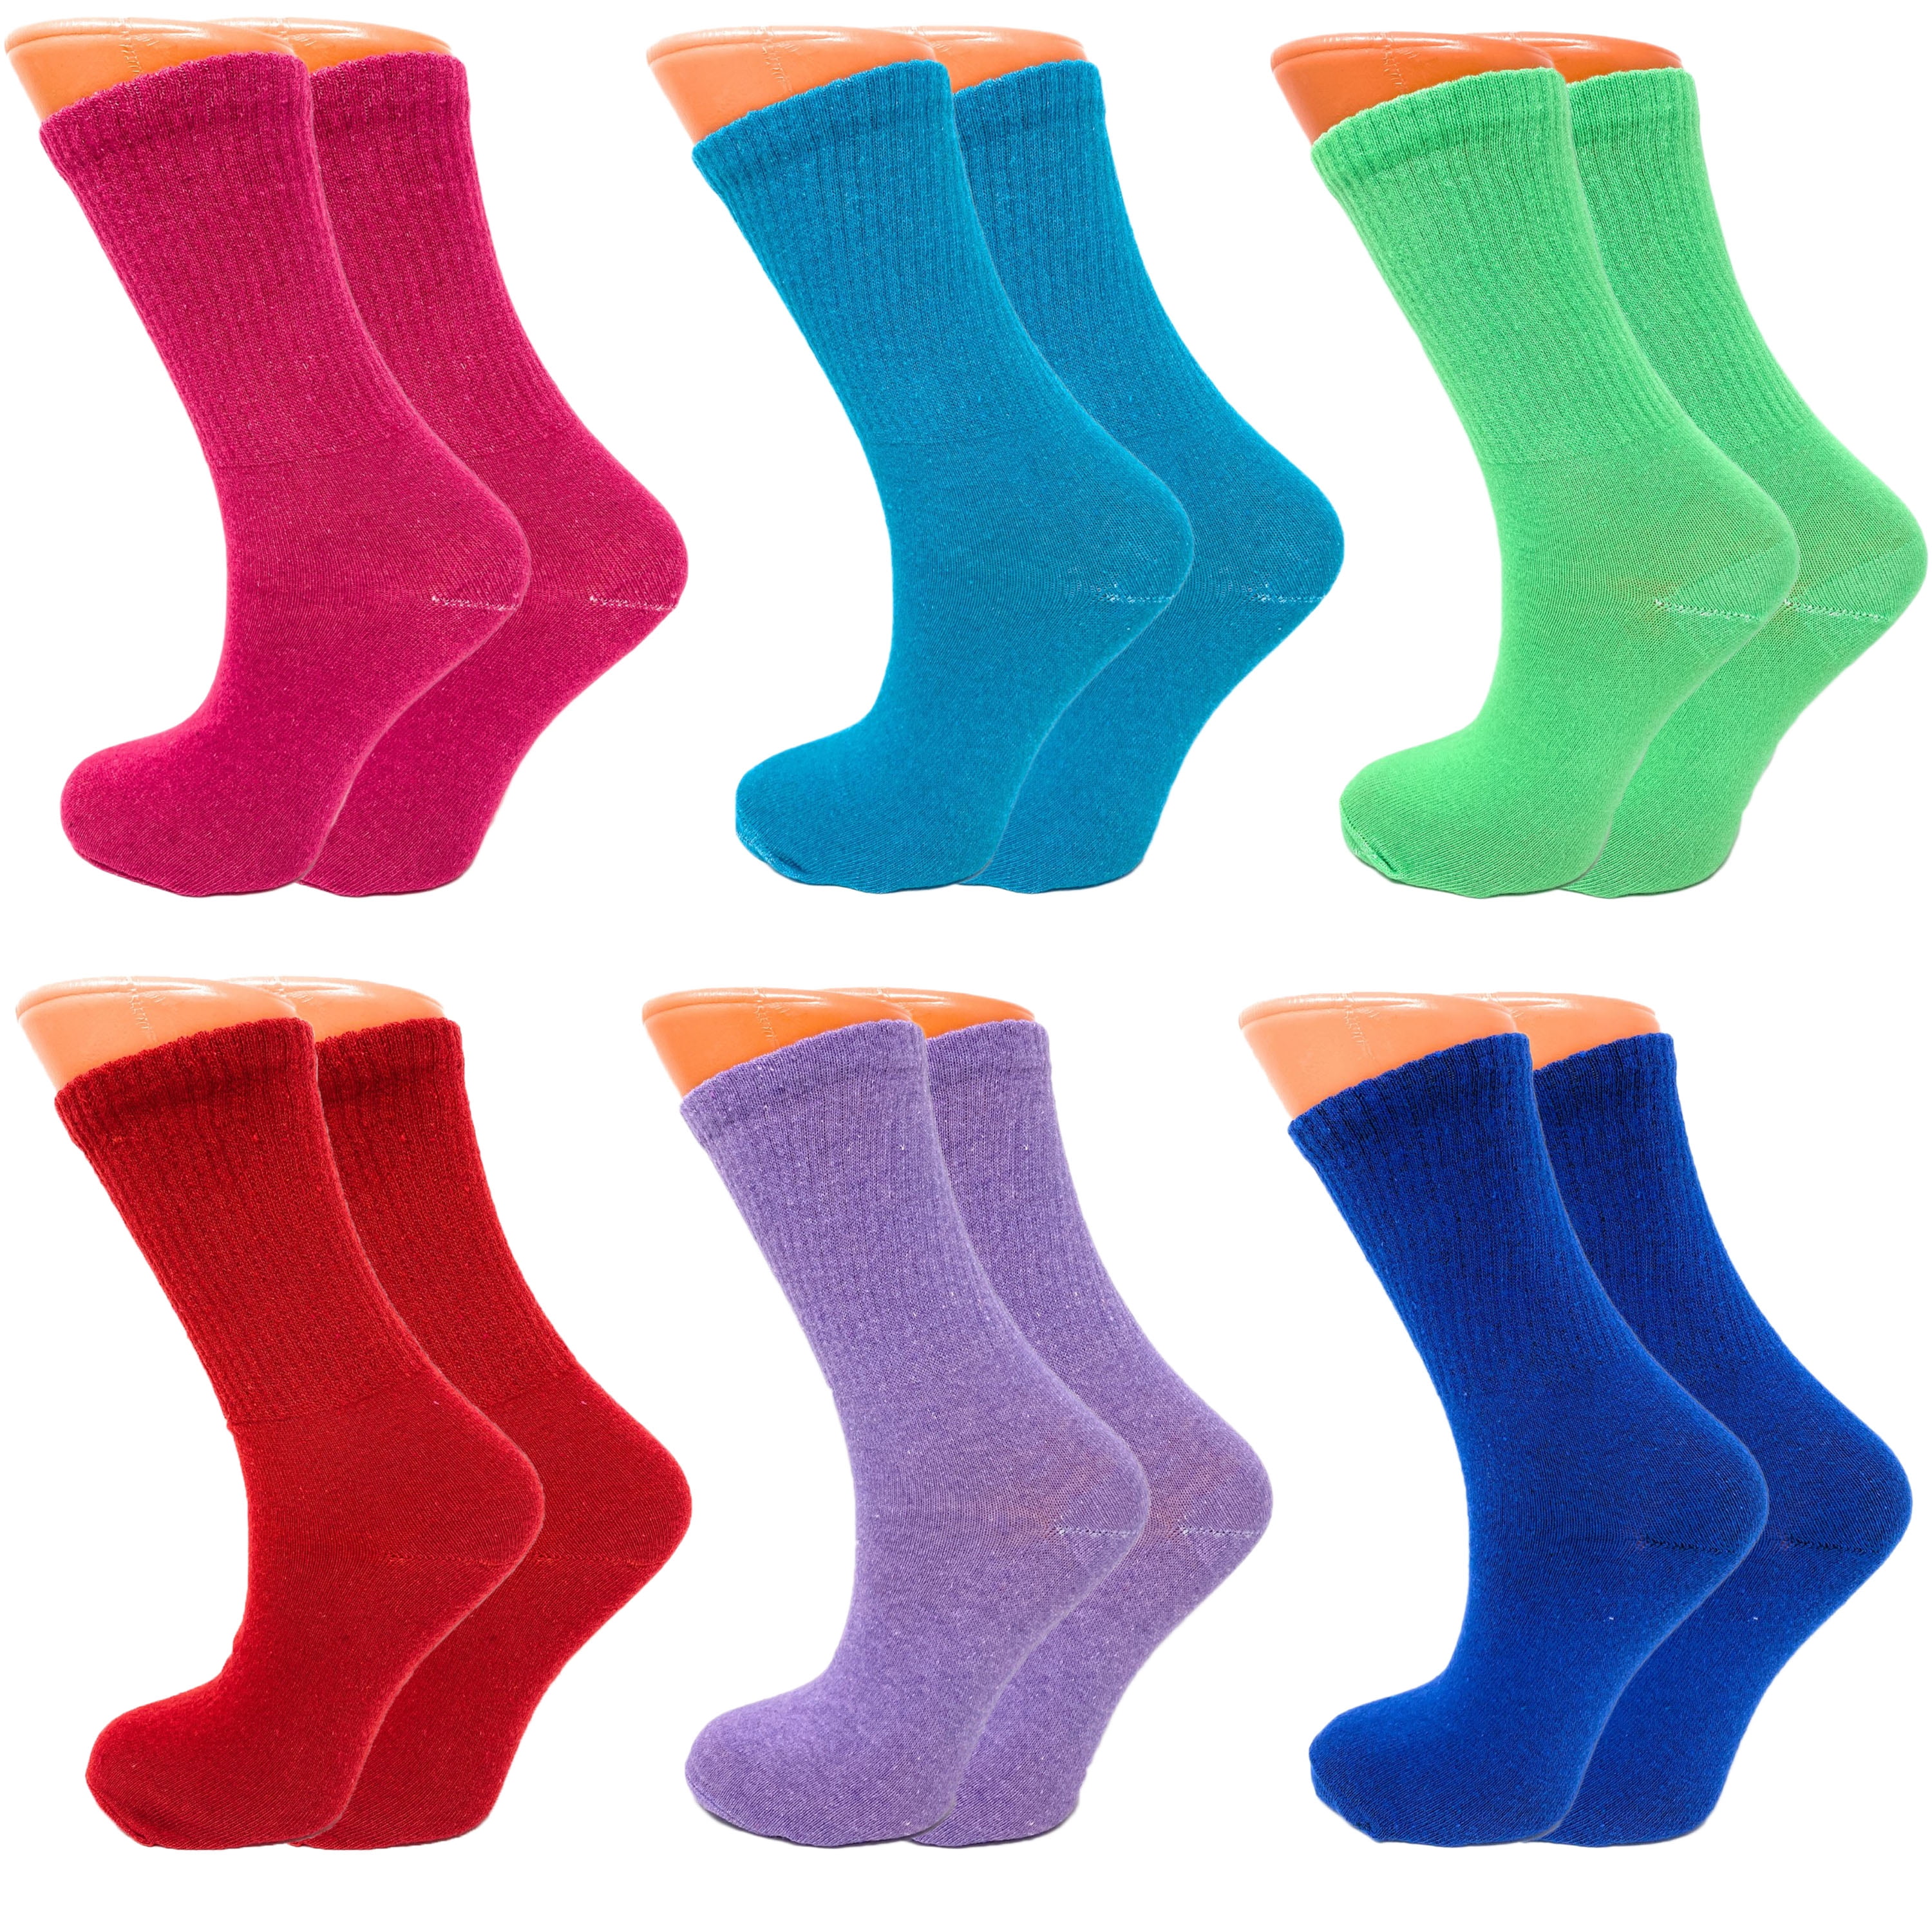 New Lot 12 Pairs Womens Multiple Color Crew Socks Cotton Size 9-11 Fashion